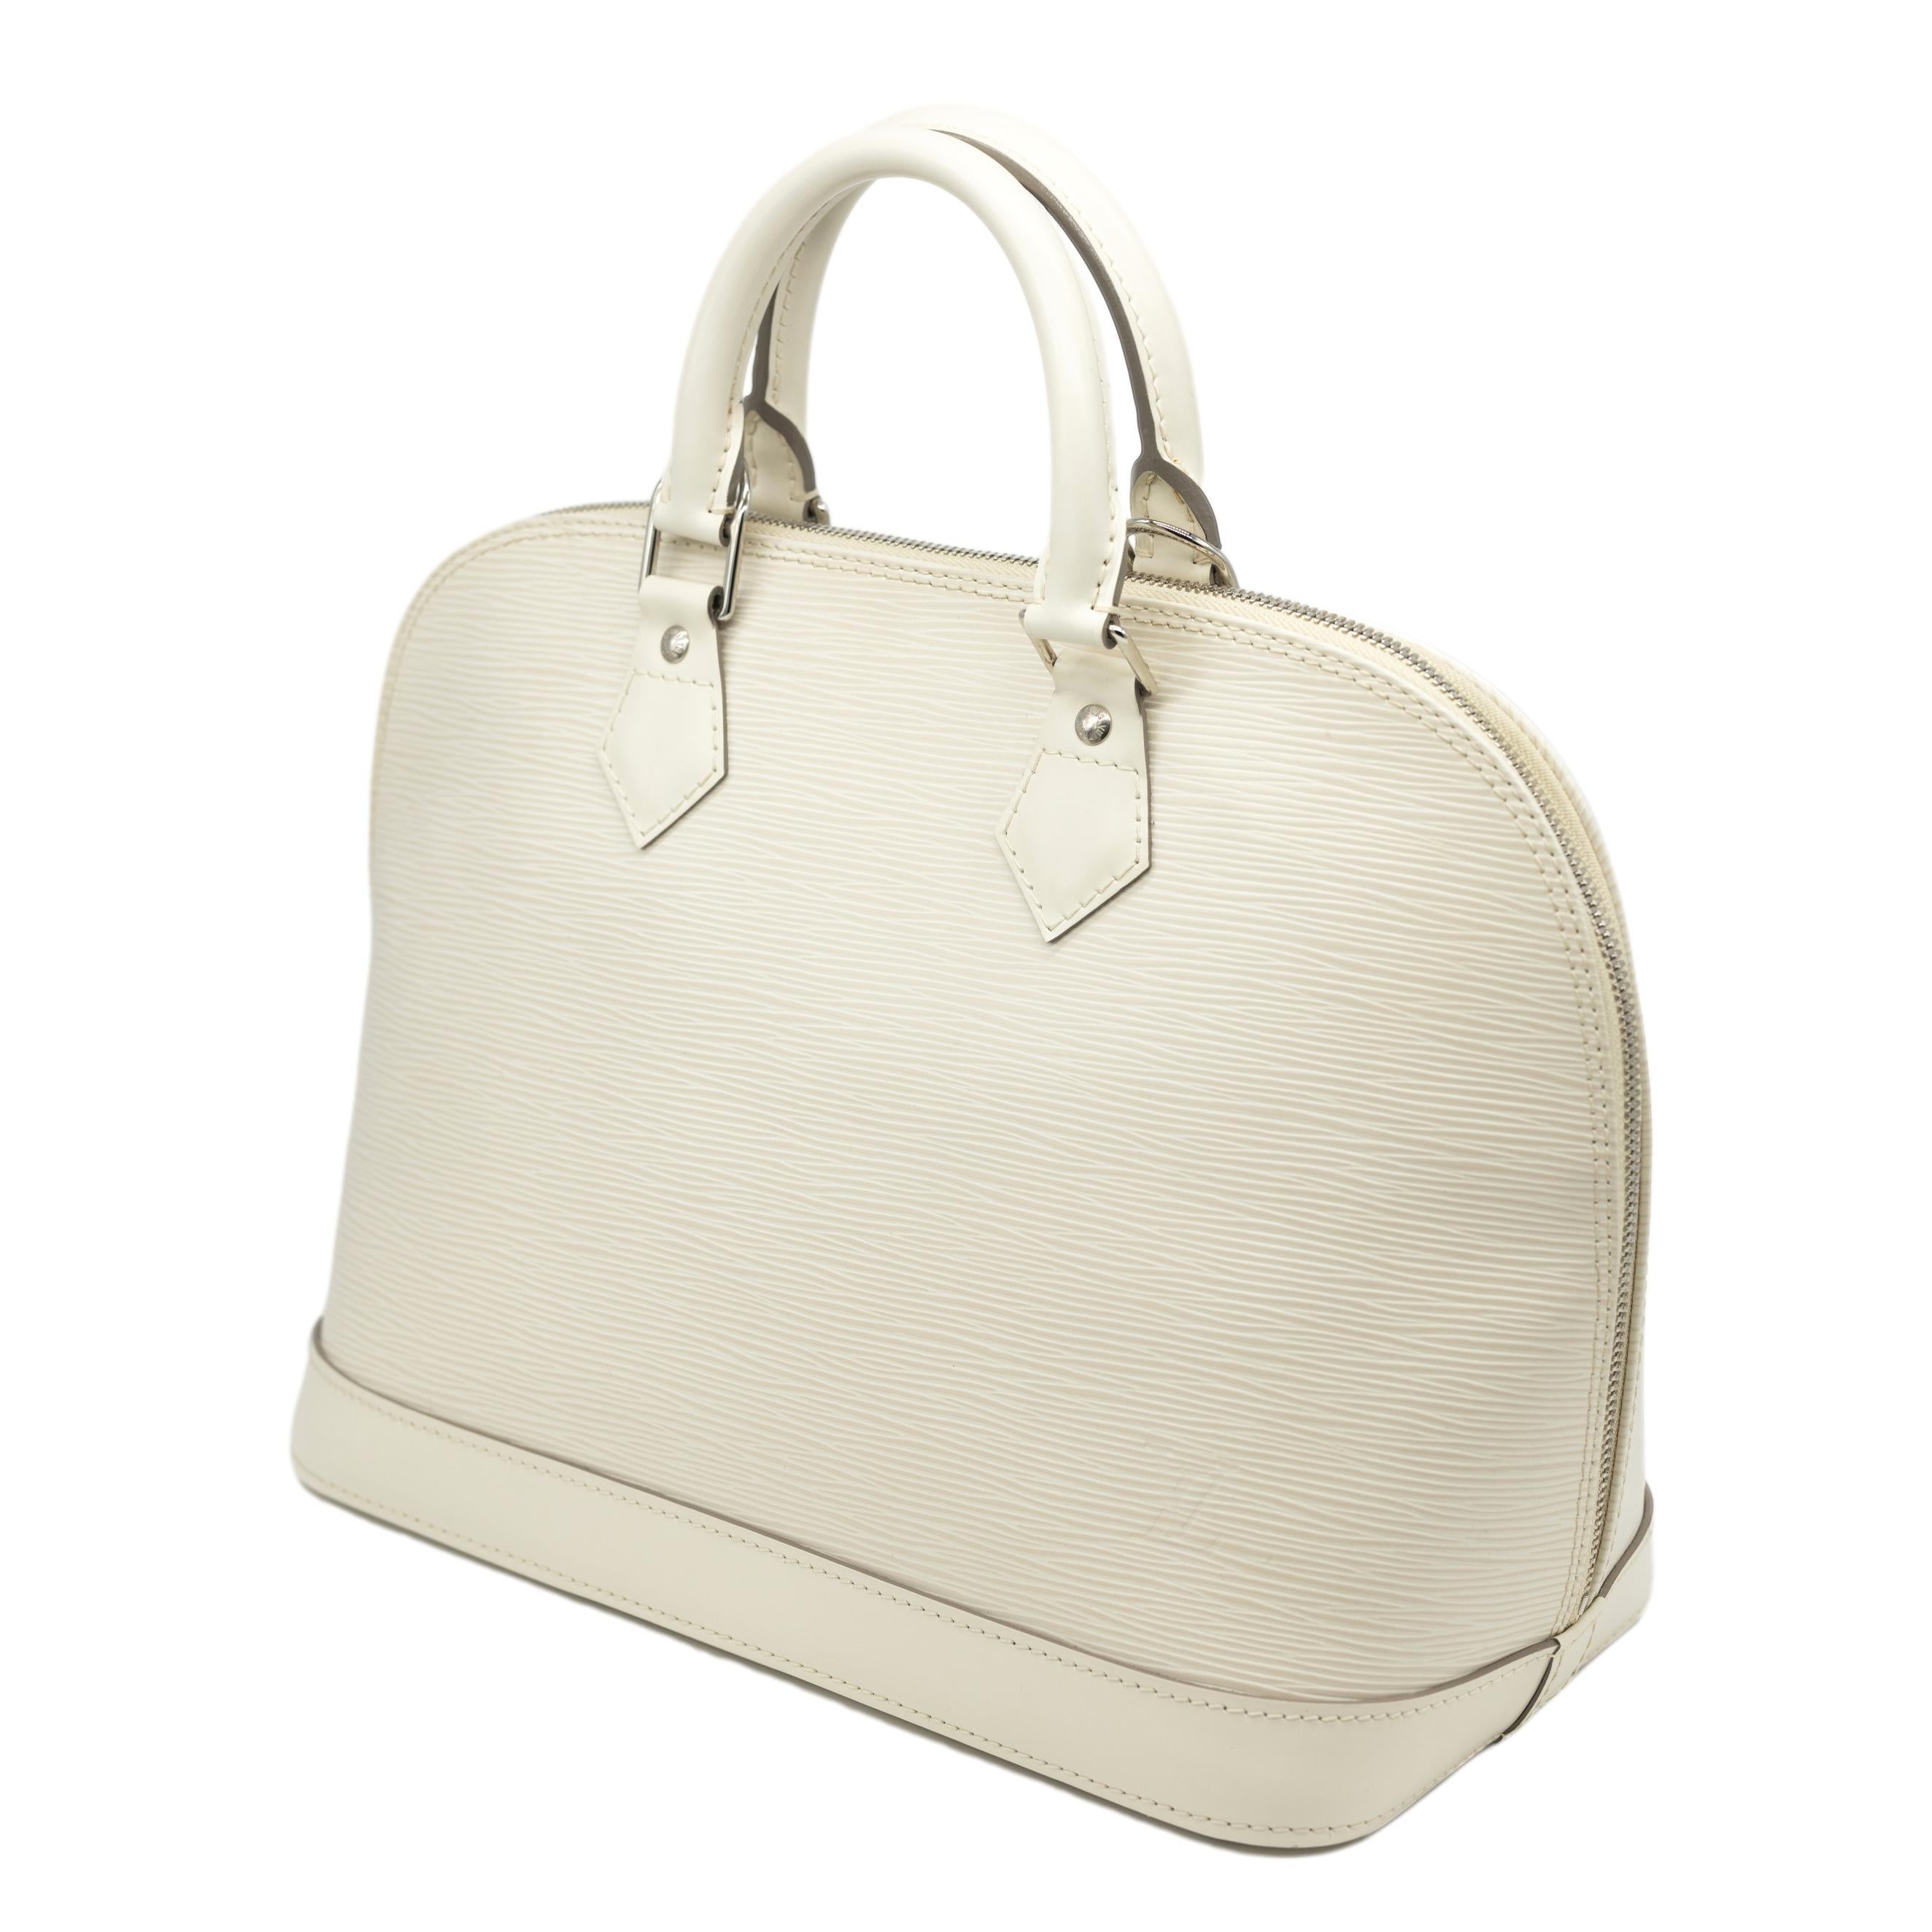 Louis Vuitton Ivory EPI Leather Alma PM Top Handle Bag, 2008. The Louis Vuitton Alma is a classic closet staple, first introduced and inspired by the architect of the Art Deco era of the early 1930's. Originally designed by Gaston-Louis Vuitton, the